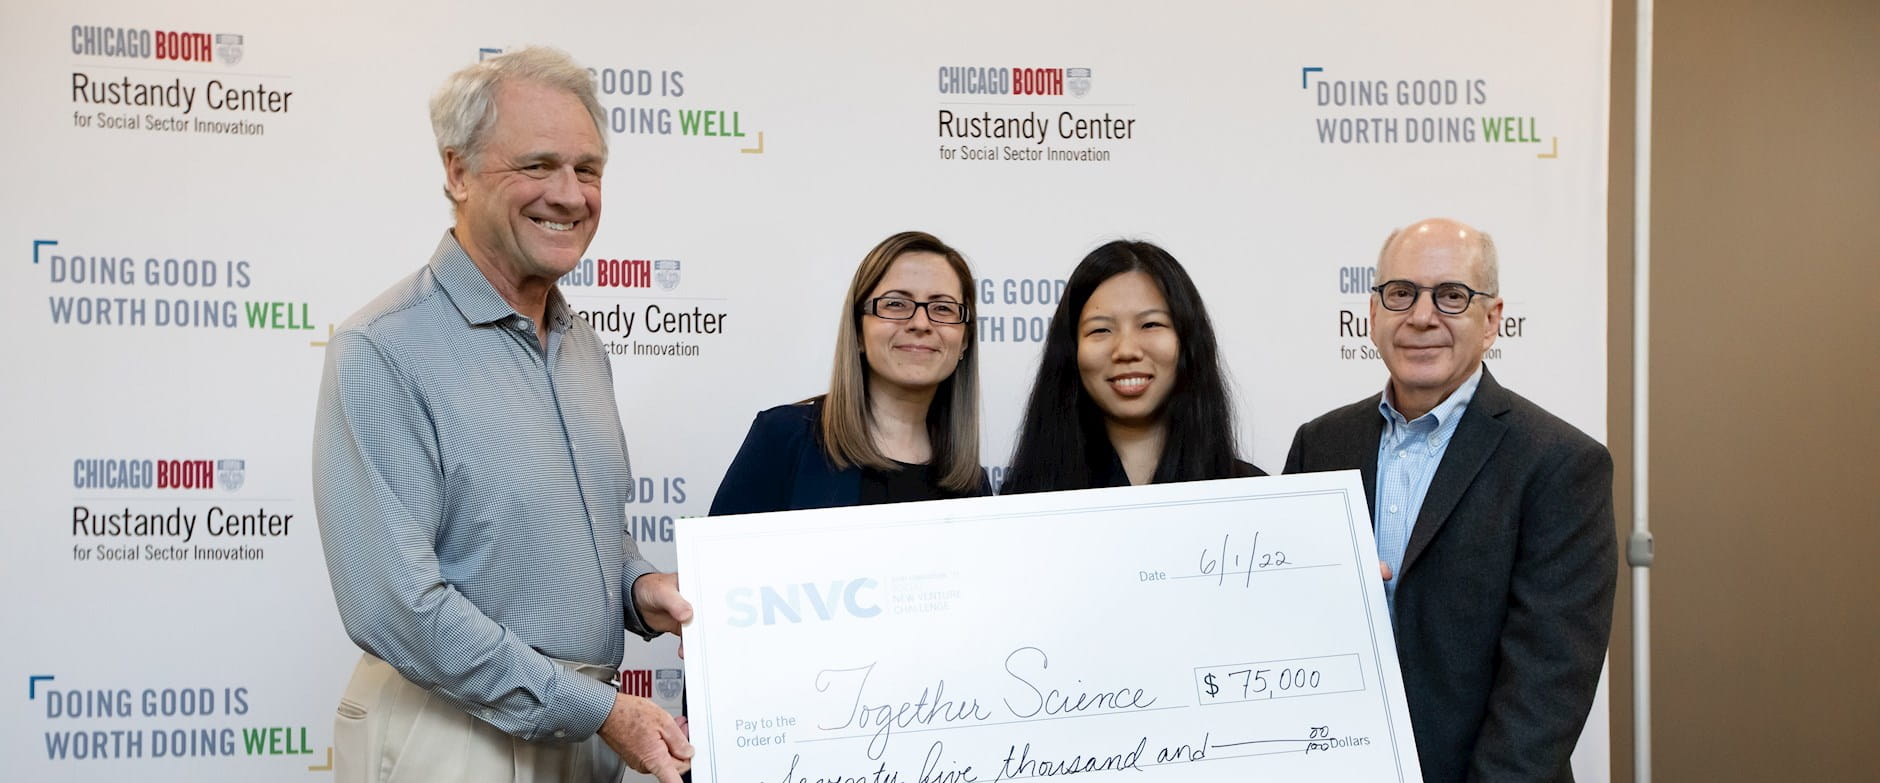 Four people holding an oversize check